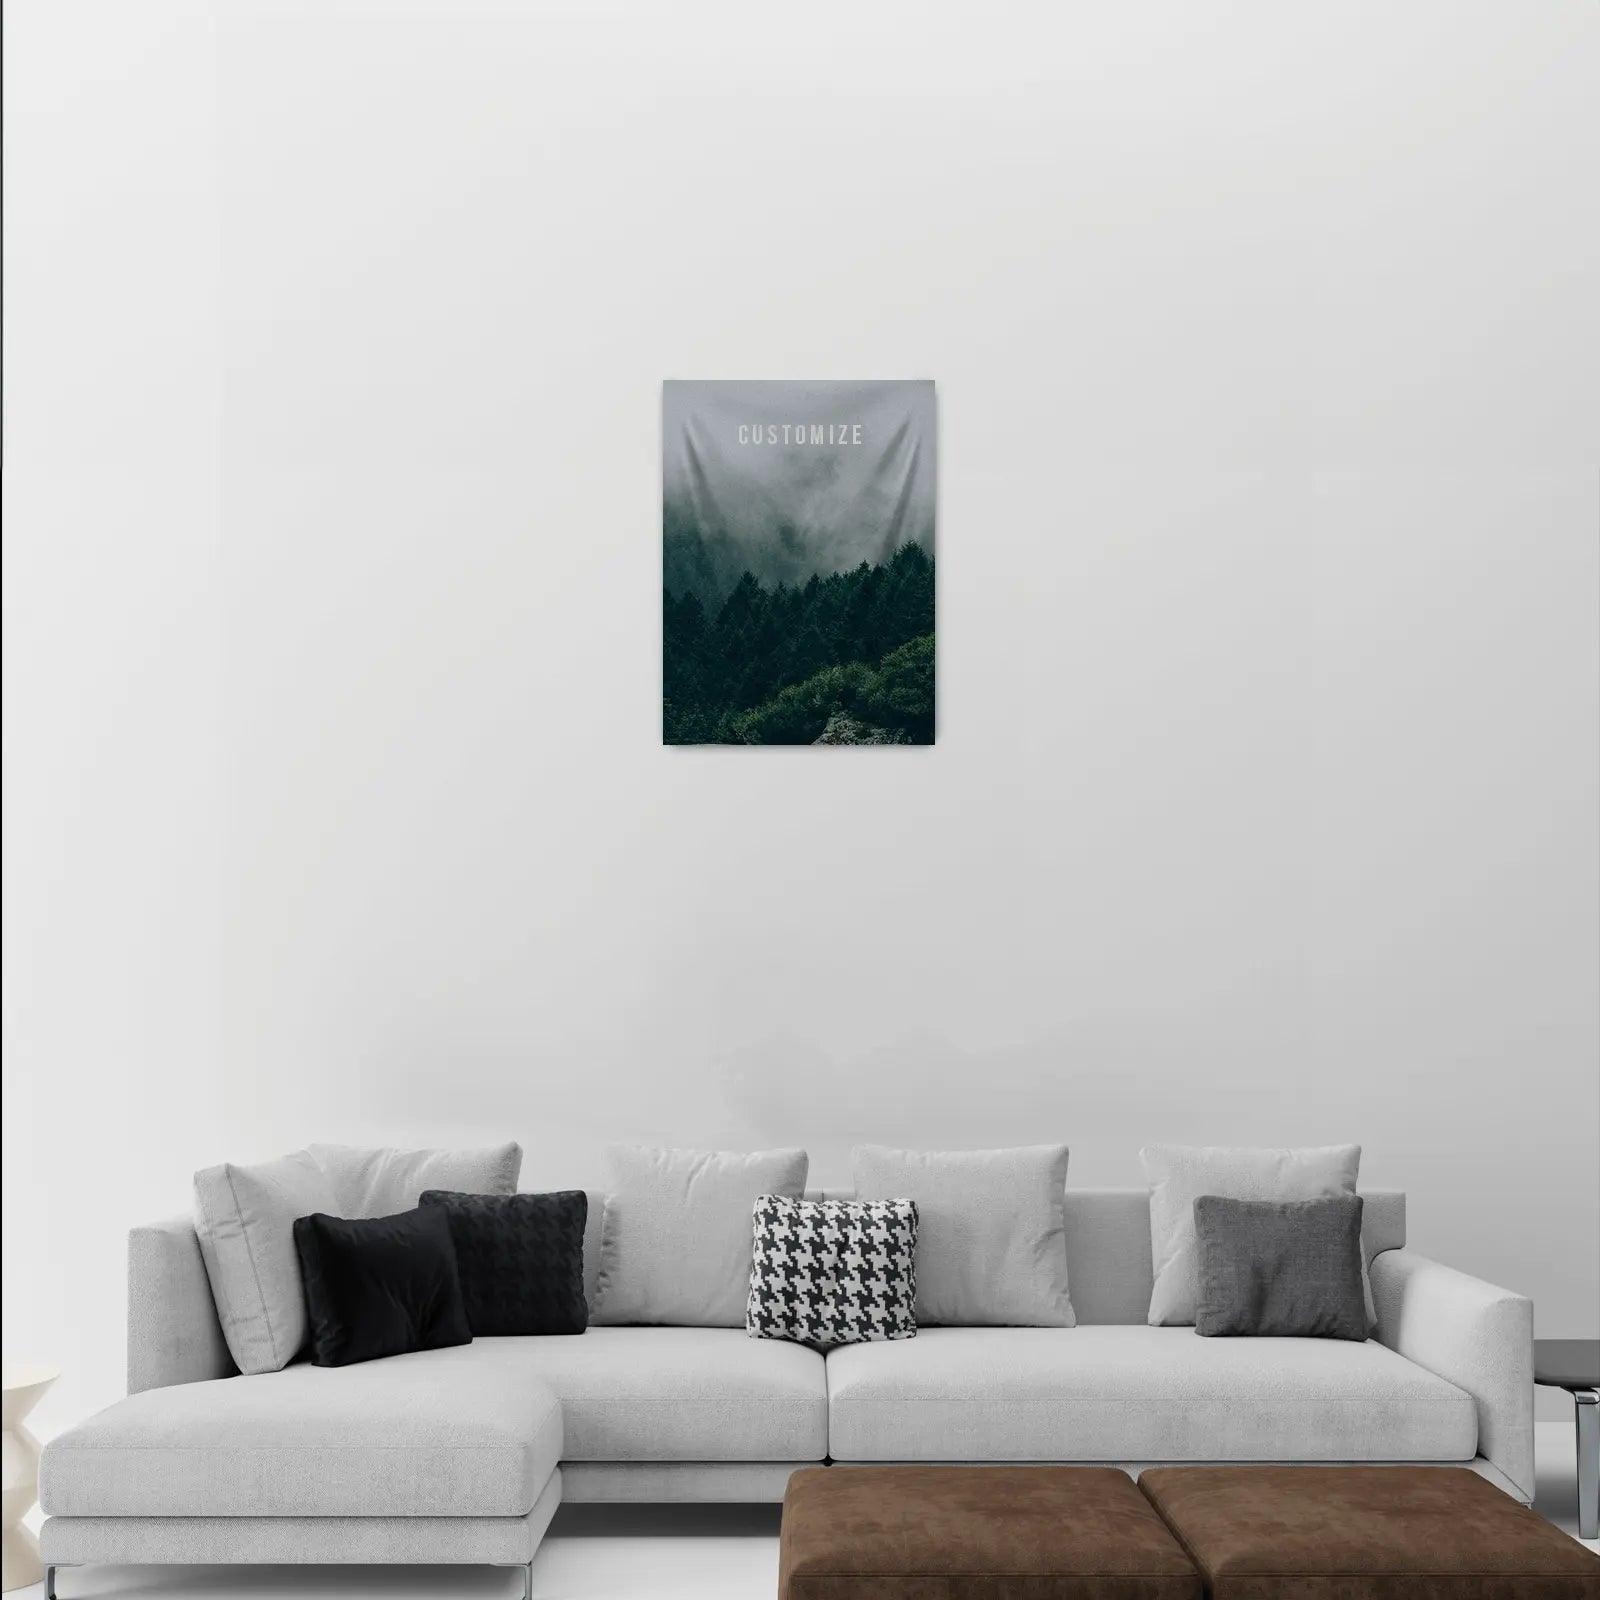 Wall Tapestry Tapestry 26-x-36-Vertical 26.95 Qstomize.com